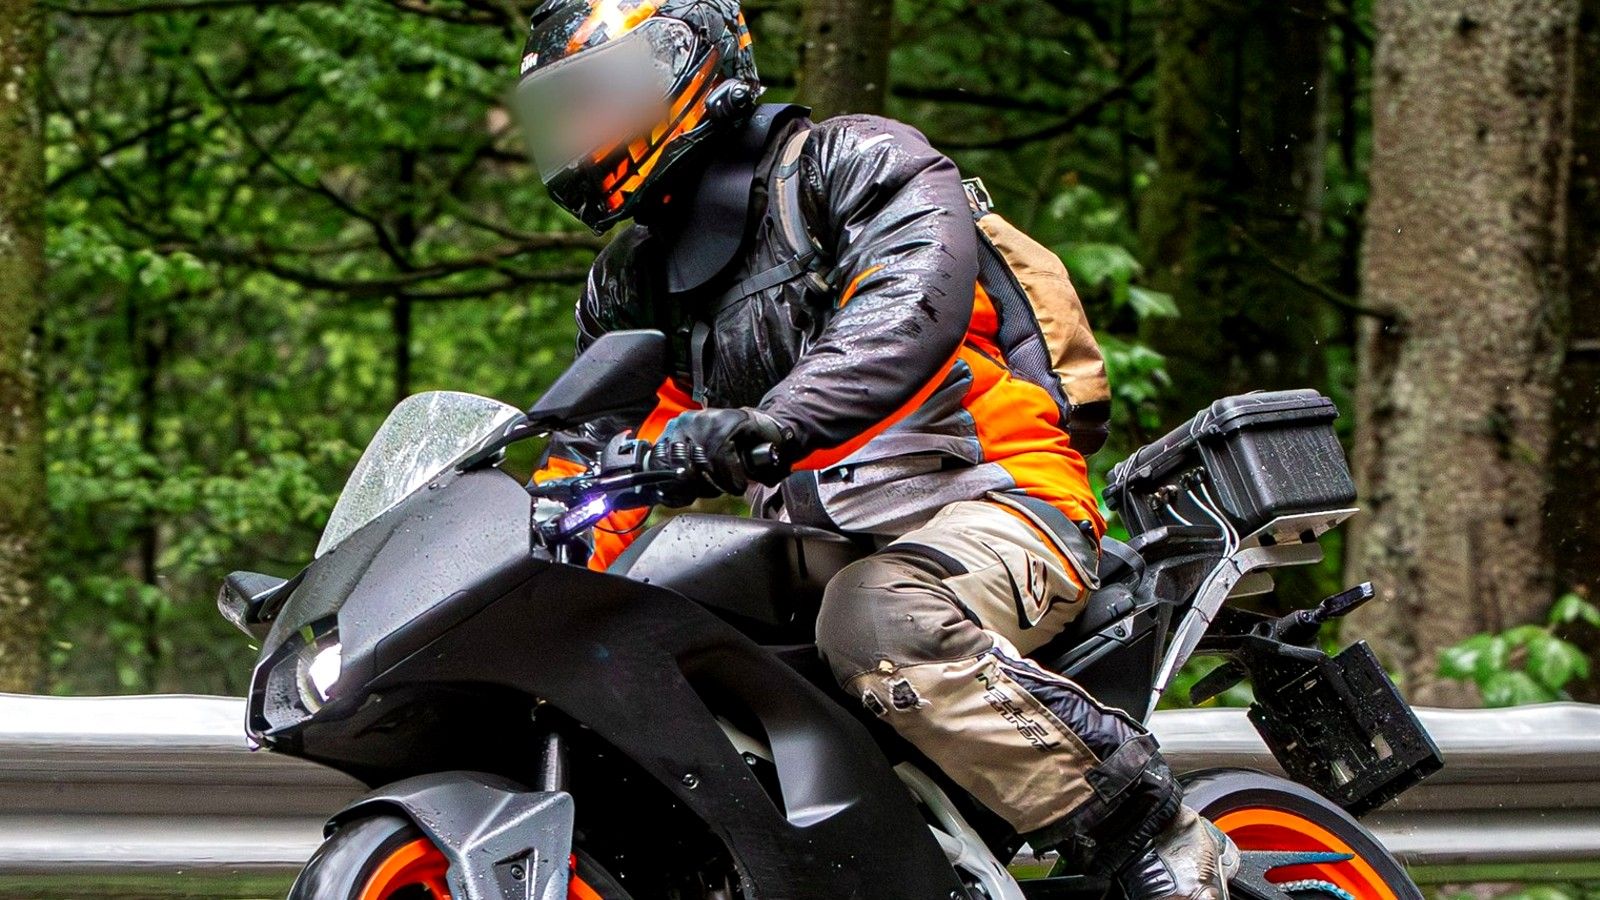 Latest Spy Shots Of The 2024 KTM RC 390 Will Leave Your Jaw Dropped